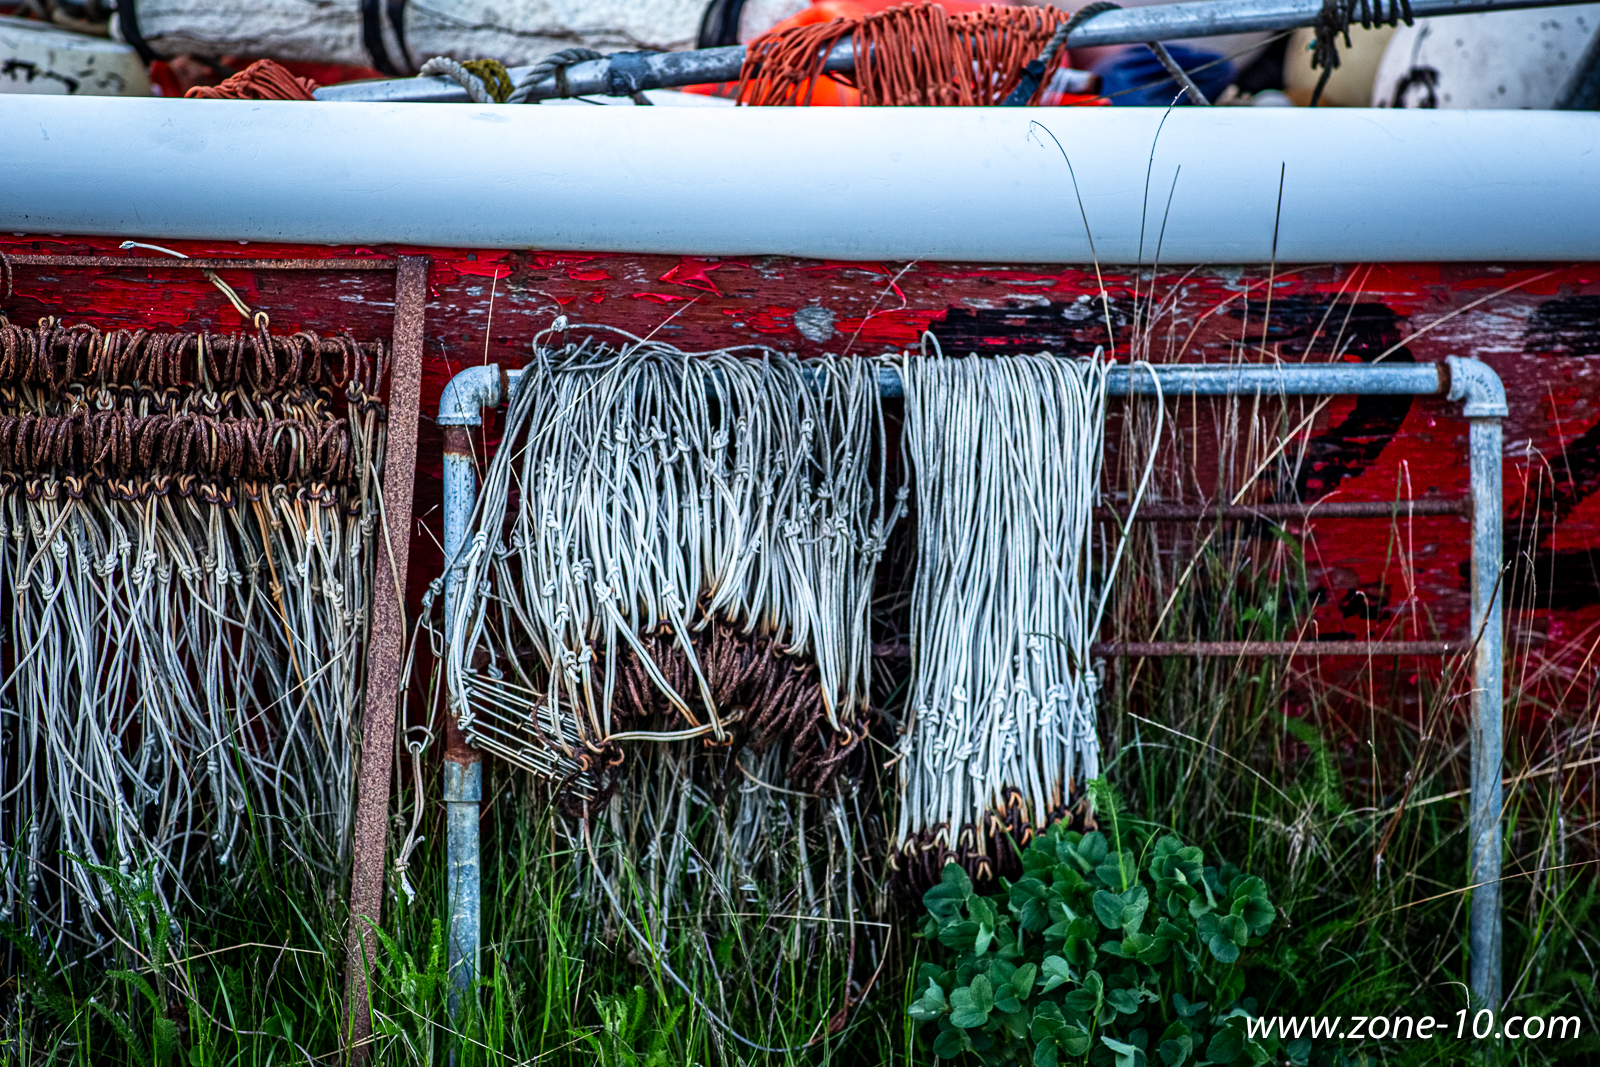 Fishing Gear and Red Paint